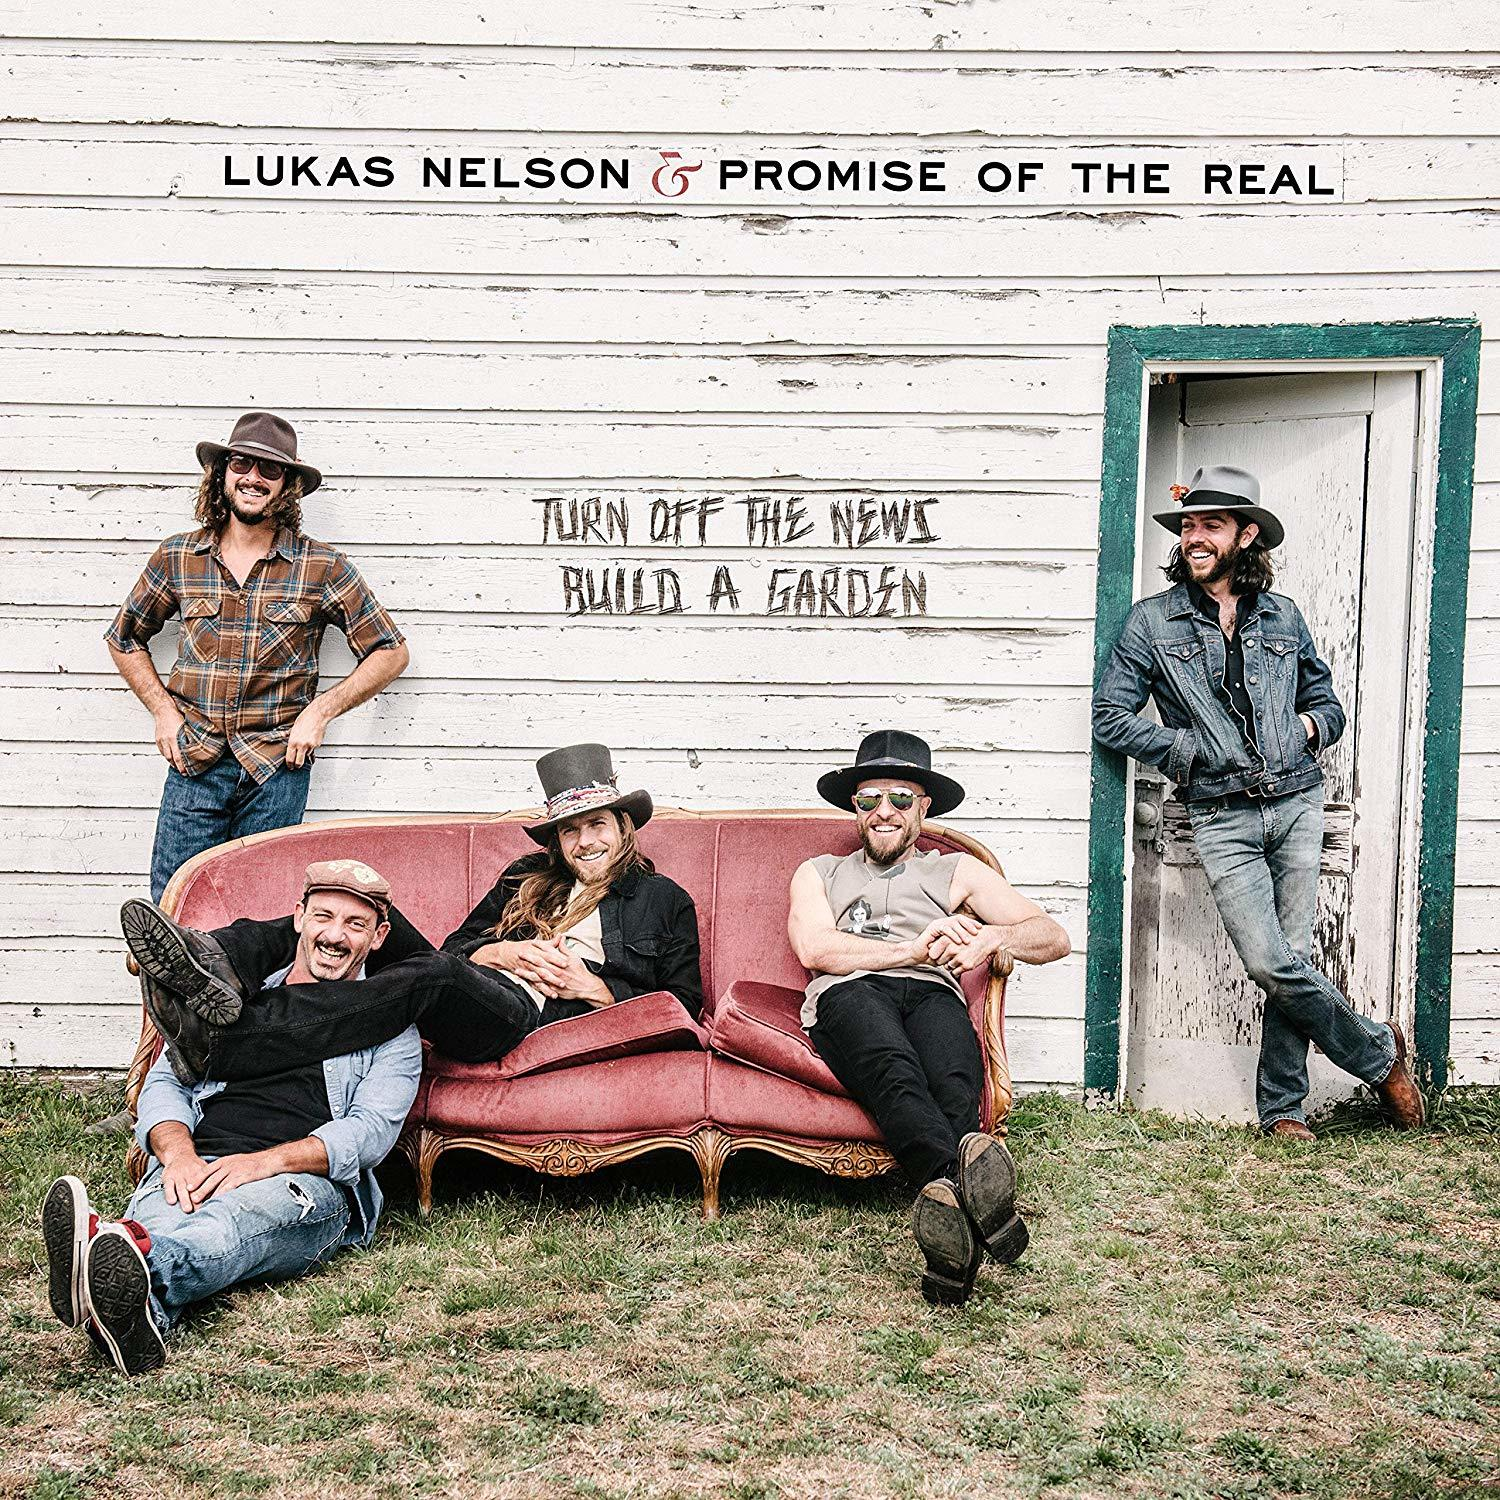 Lukas & Promise - (Build - A The Of The (Vinyl) Turn (2LP) Off Real Garden) News Nelson